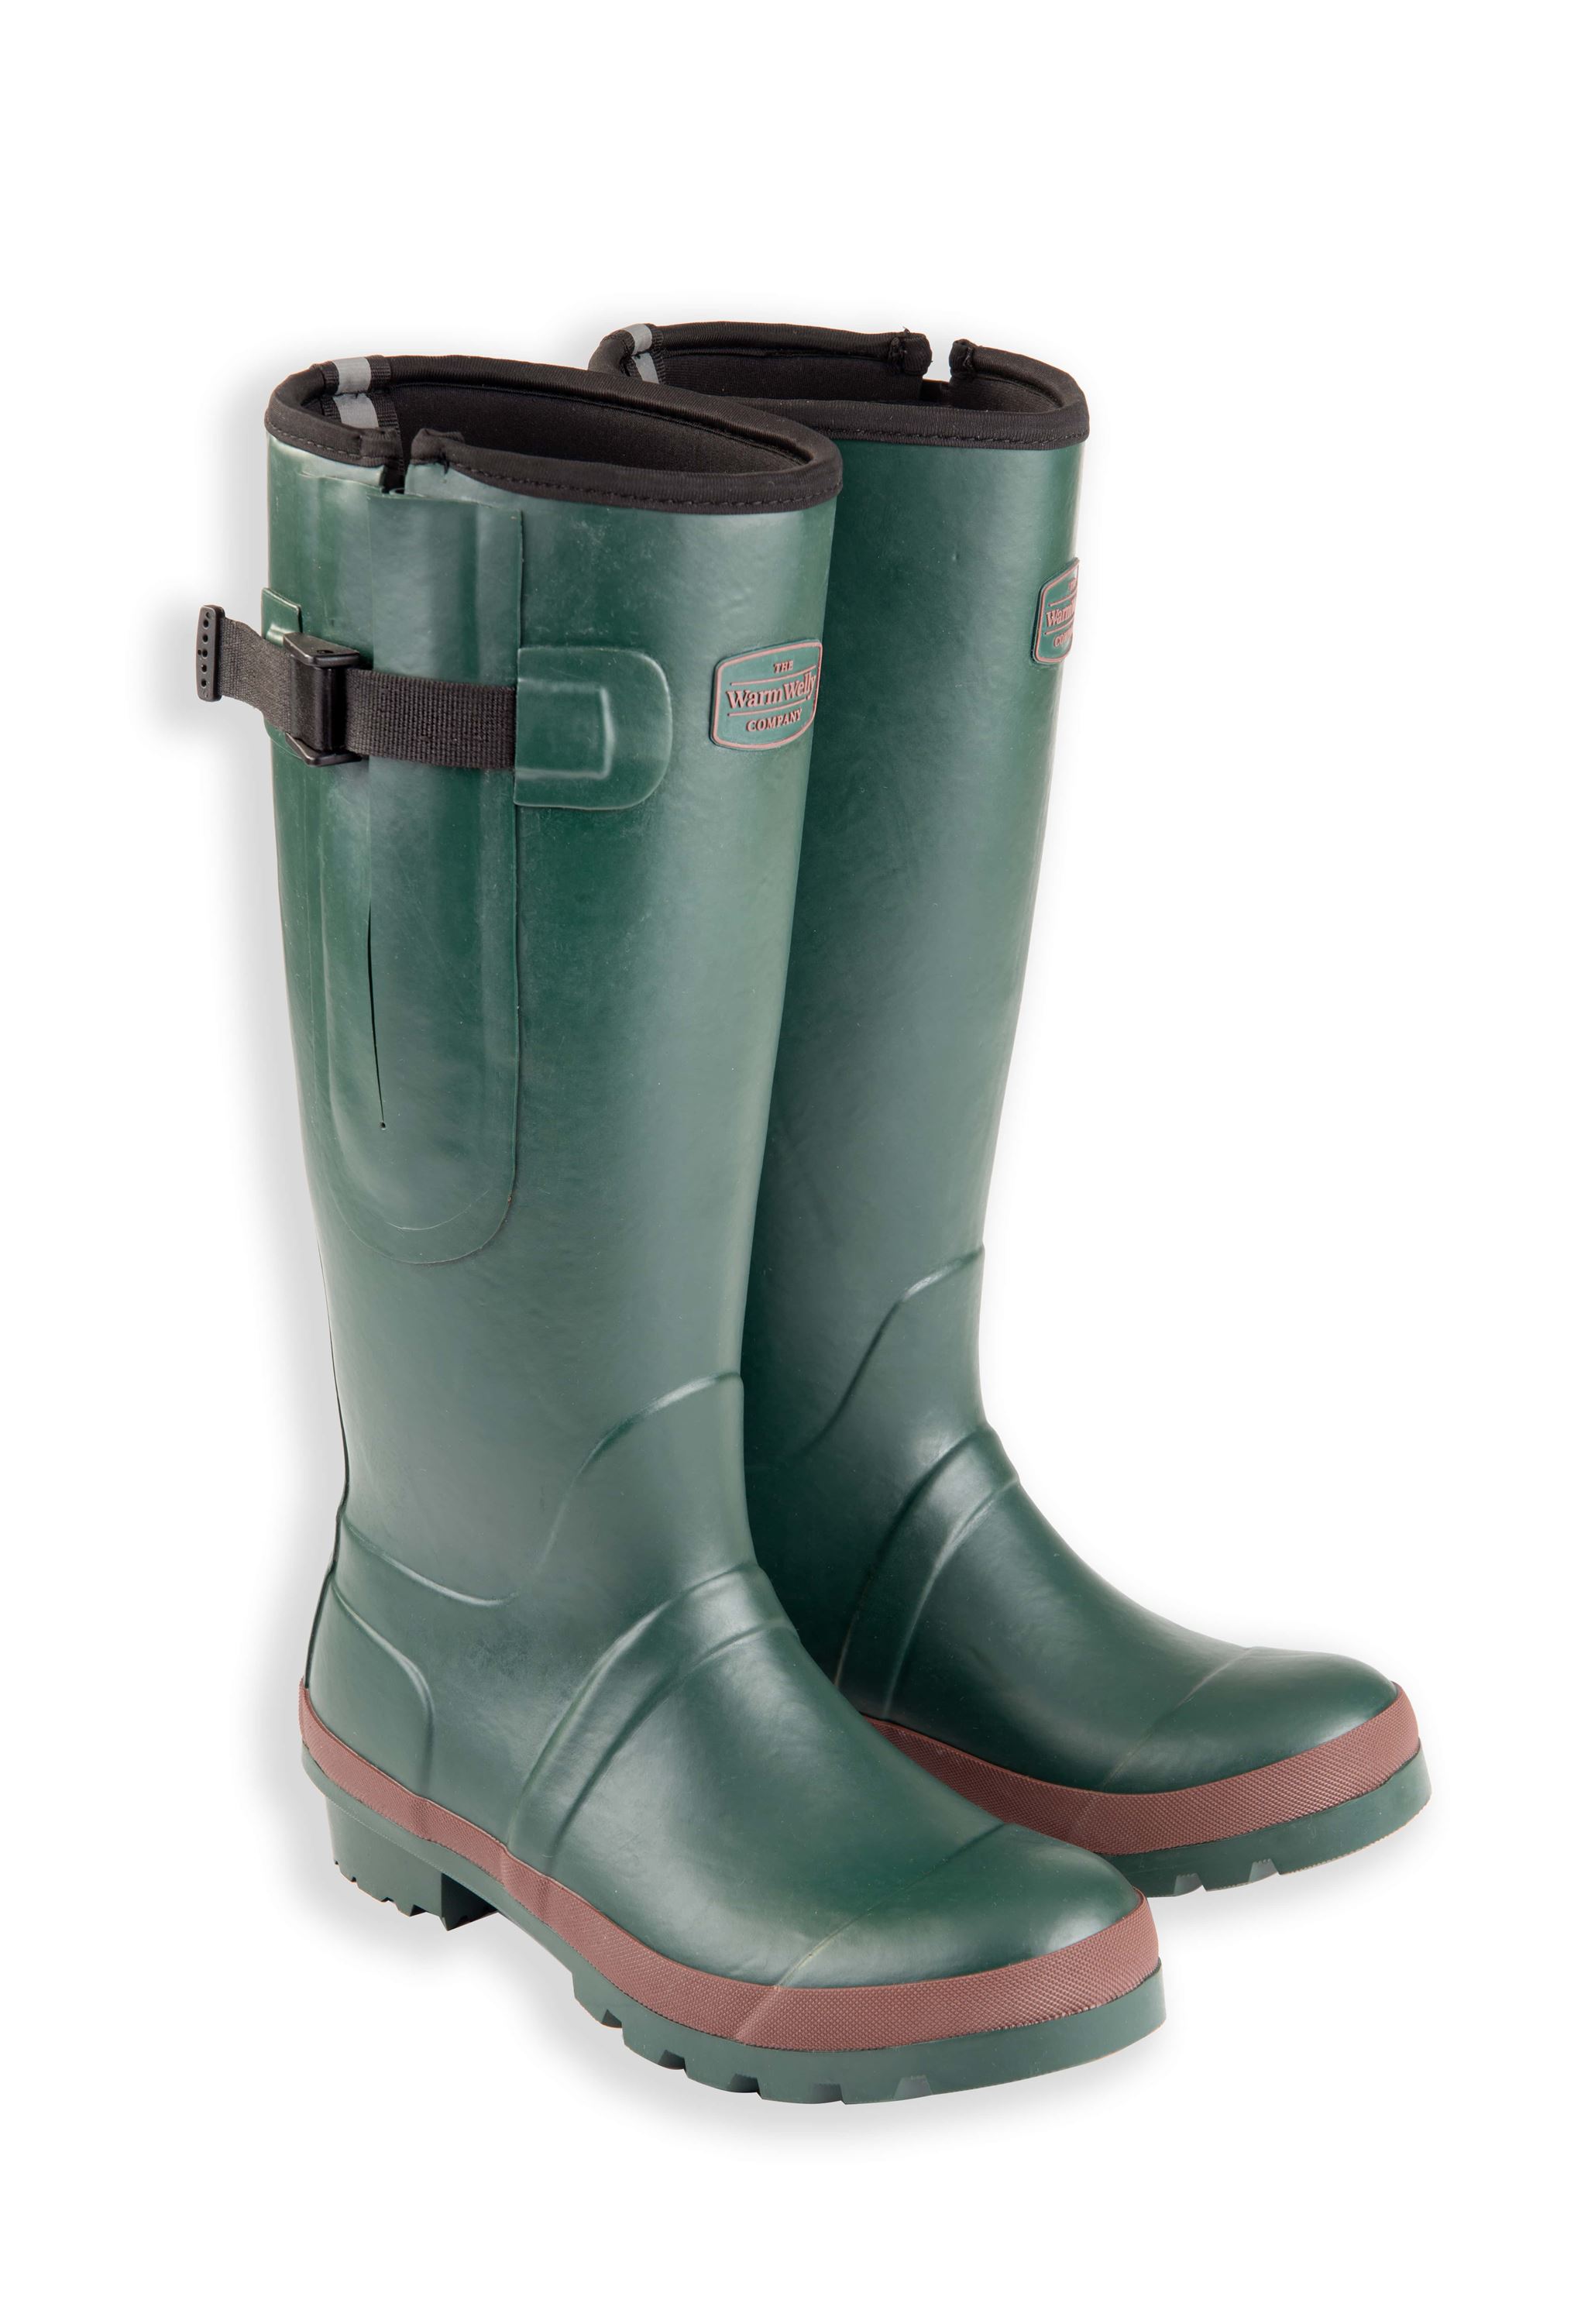 Green Adult Wide Warm Wellies | The Warm Welly Company